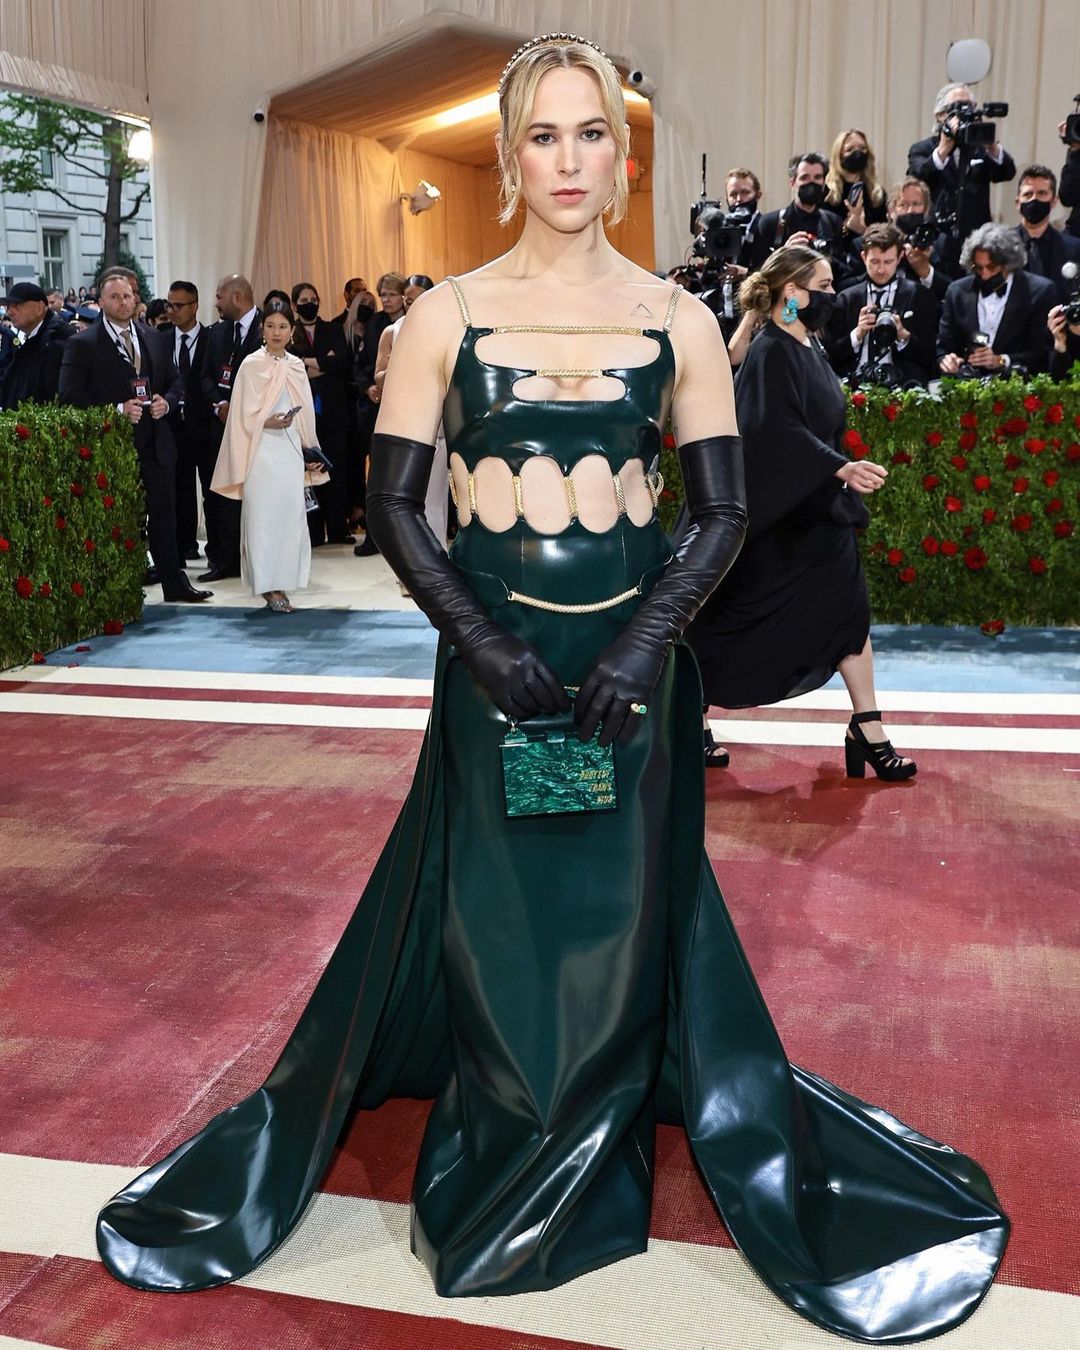 The MET Gala 2022 (@metgalaofficial) theme was Gilded Glamour and